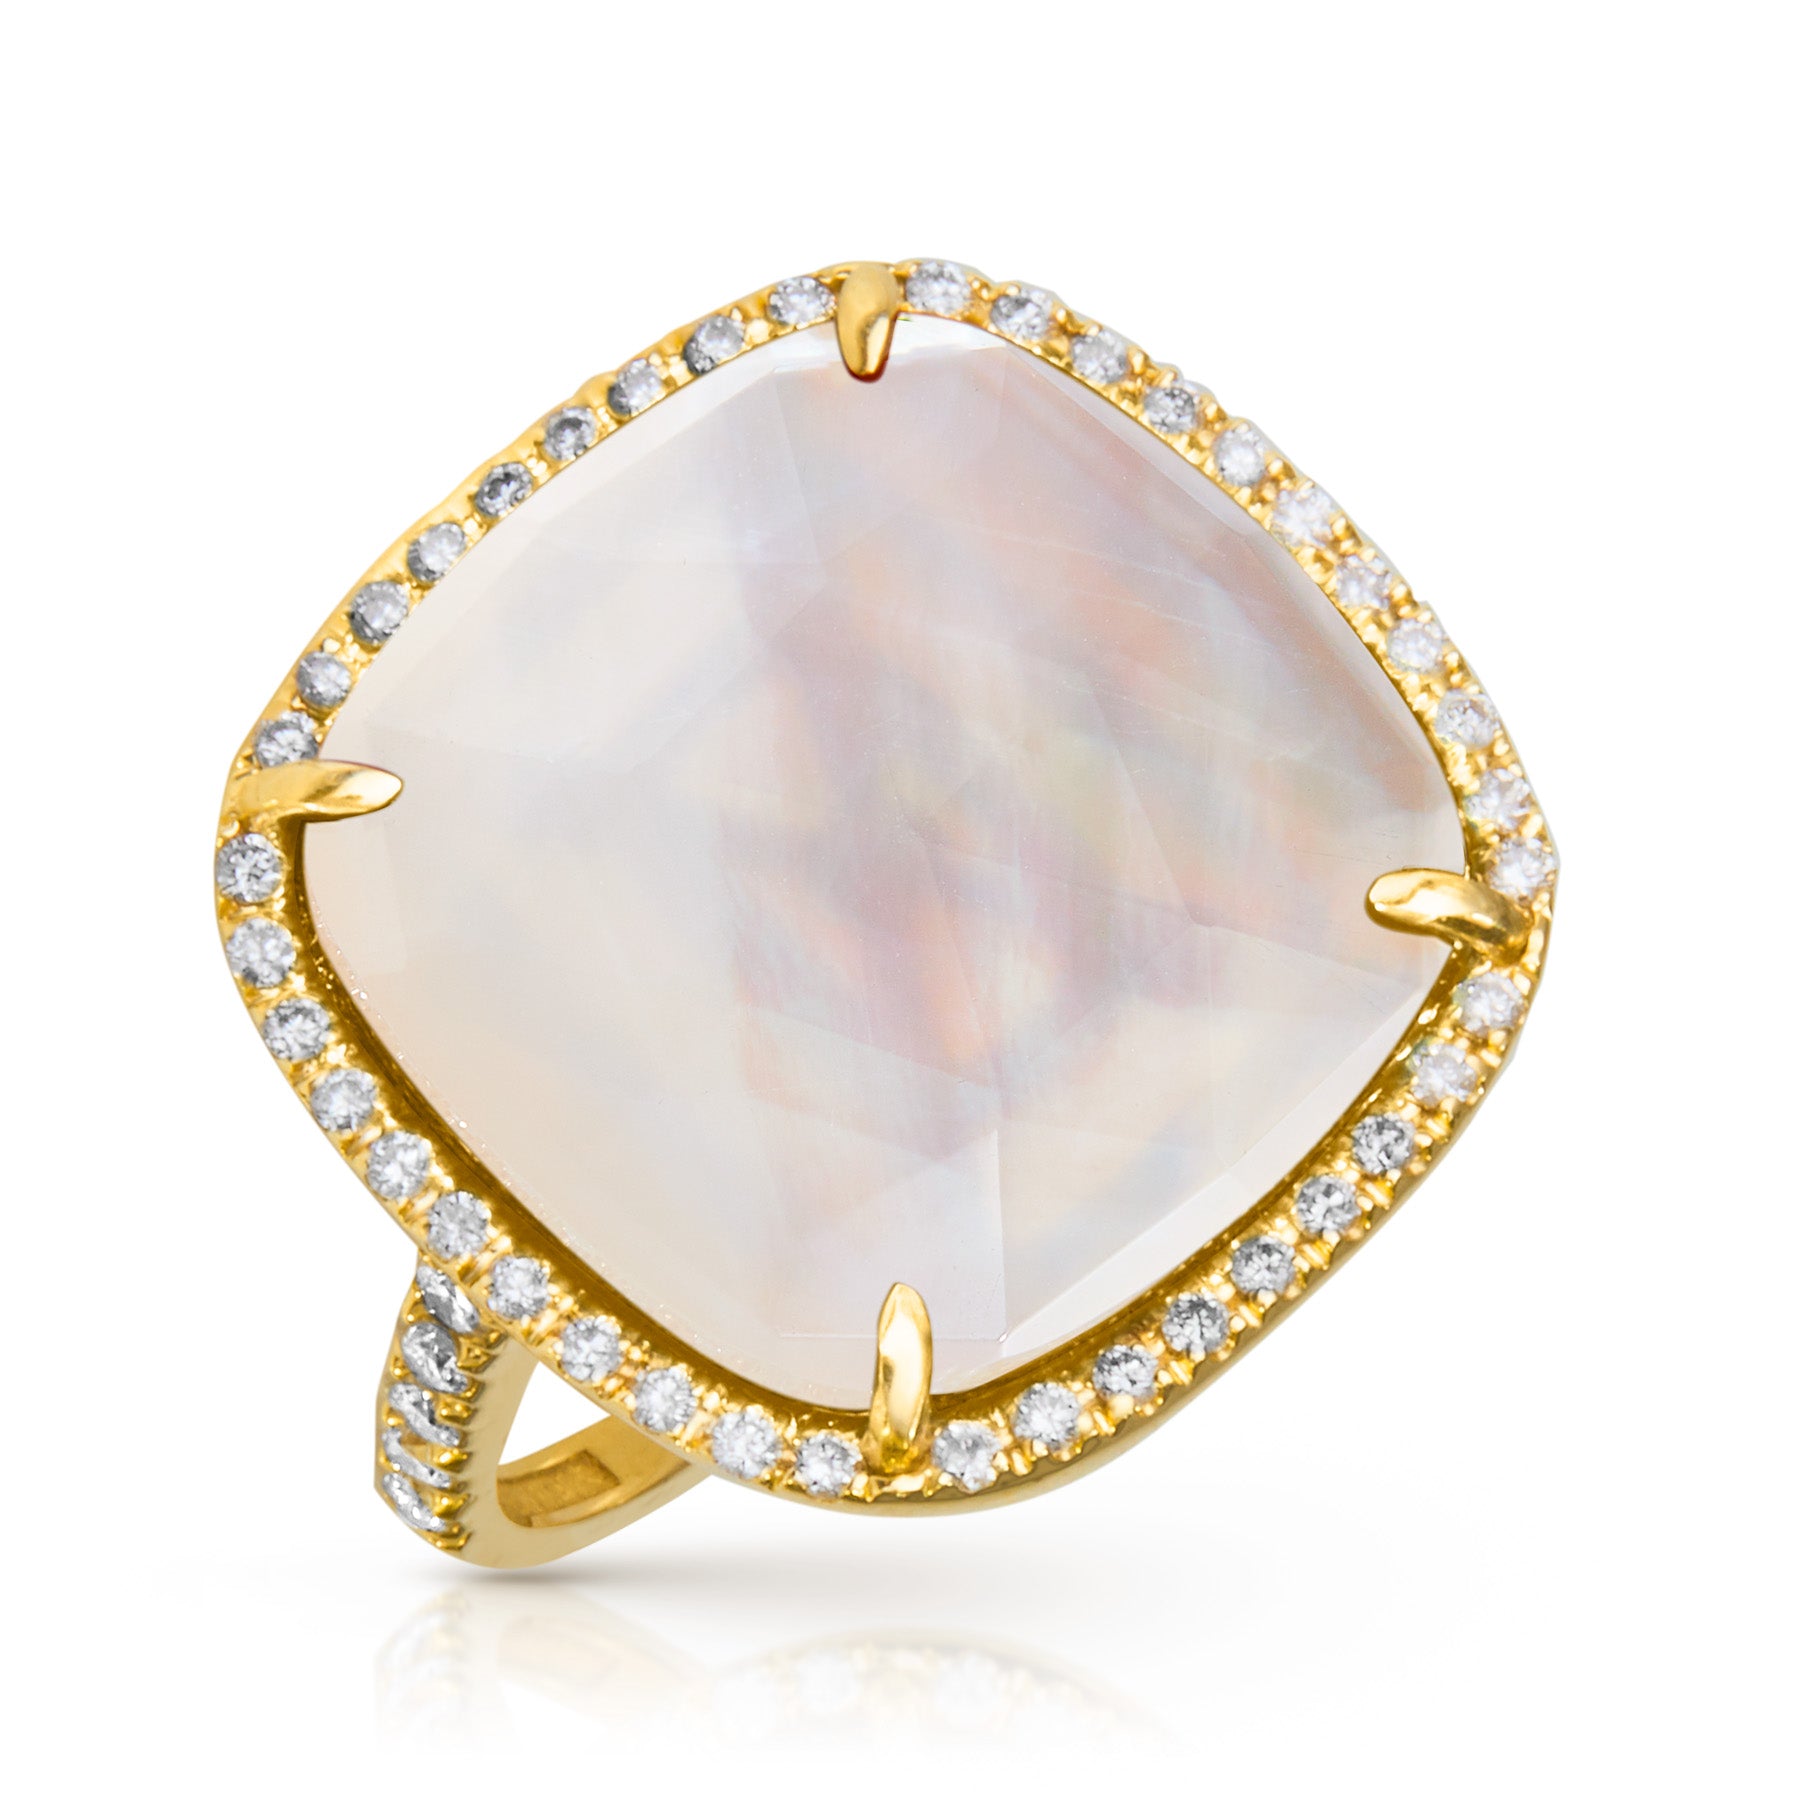 14KT Yellow Gold Diamond Mother of Pearl Doublet Cushion Cut Cocktail Ring